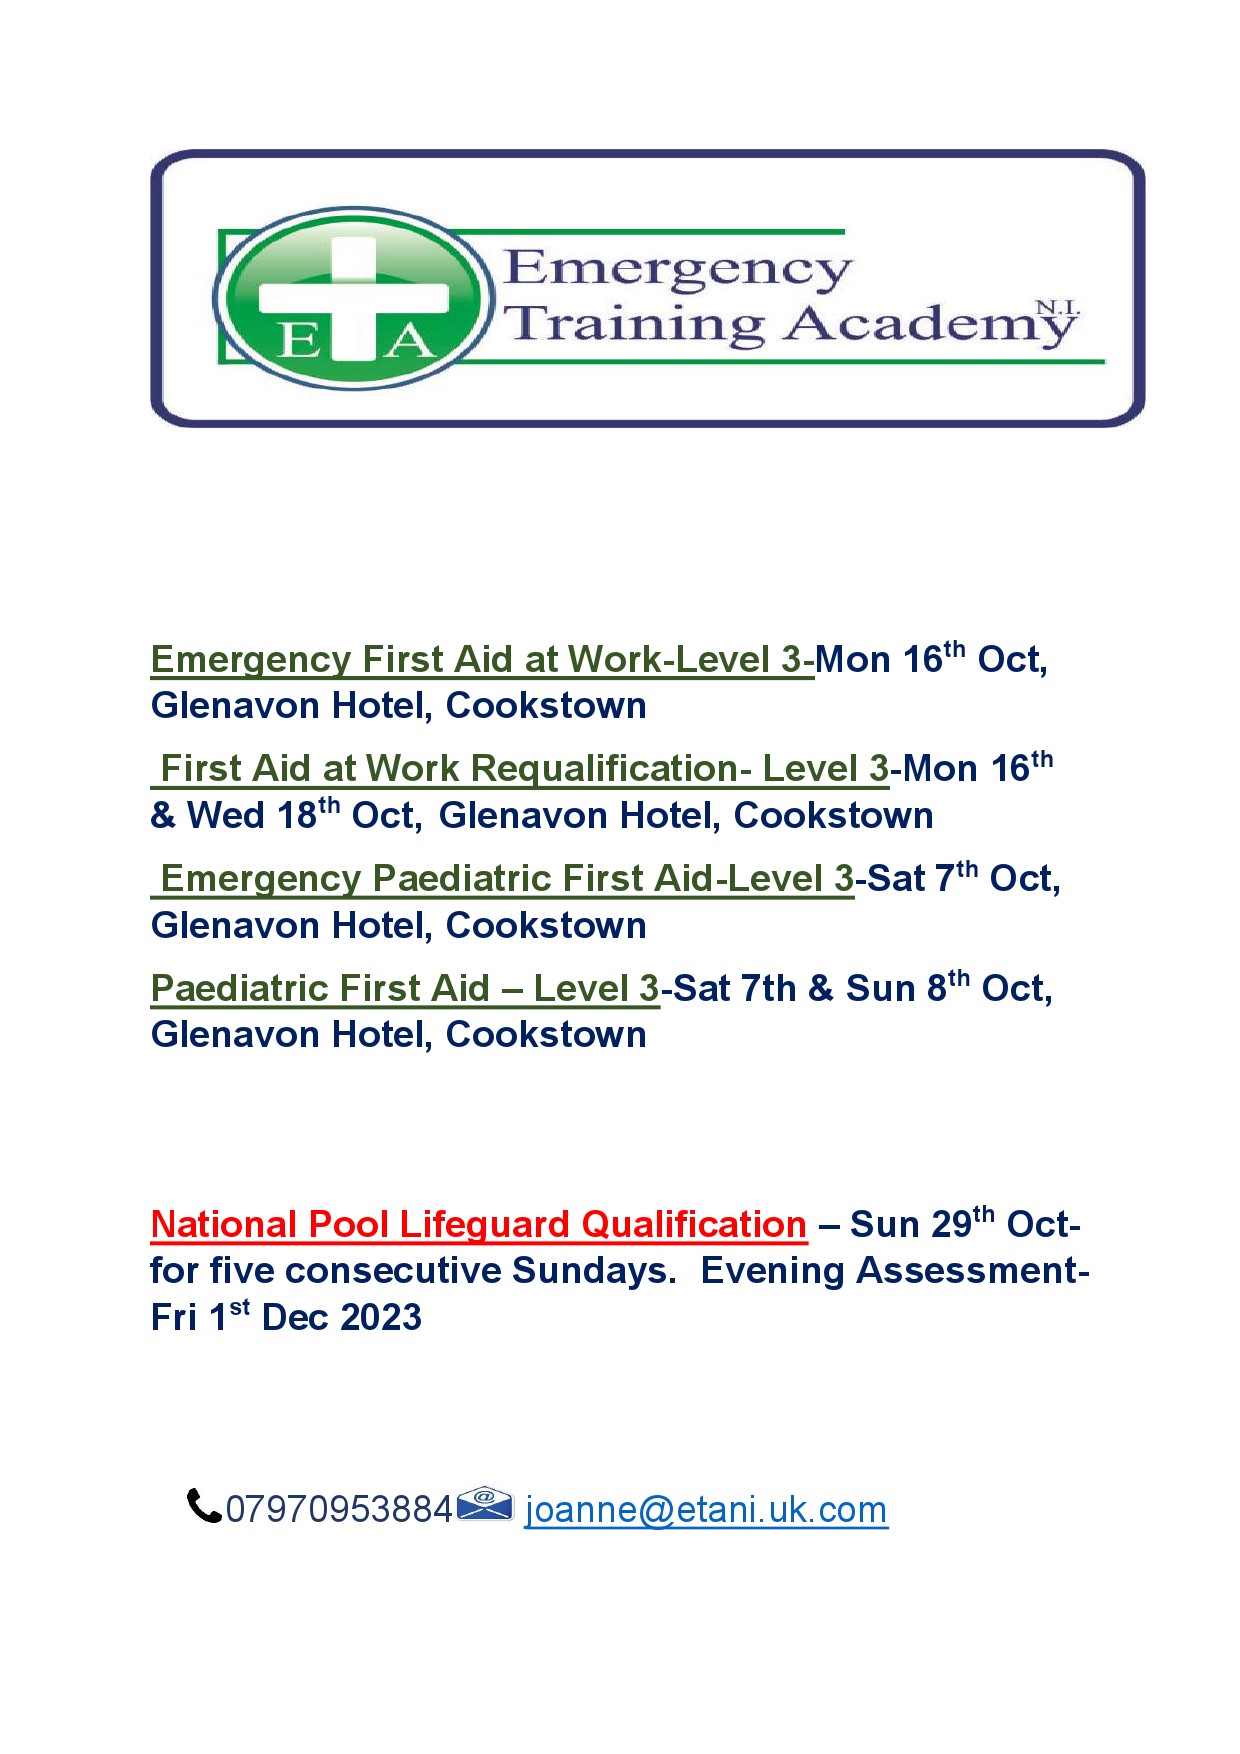 Upcoming First Aid courses run by ETA NI located in your local area that can be attended by both children and adults.